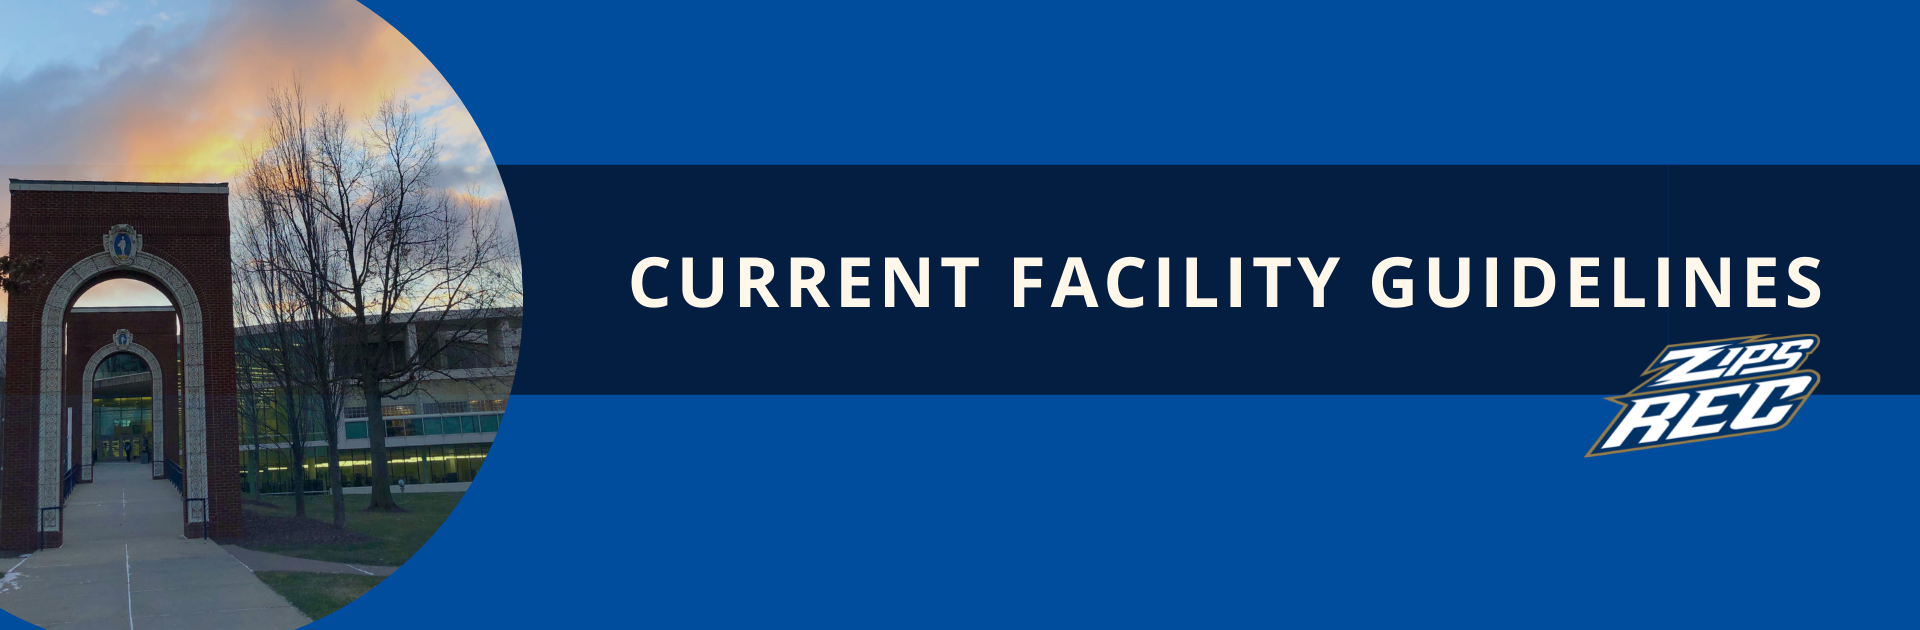 Information on updated facility guidelines